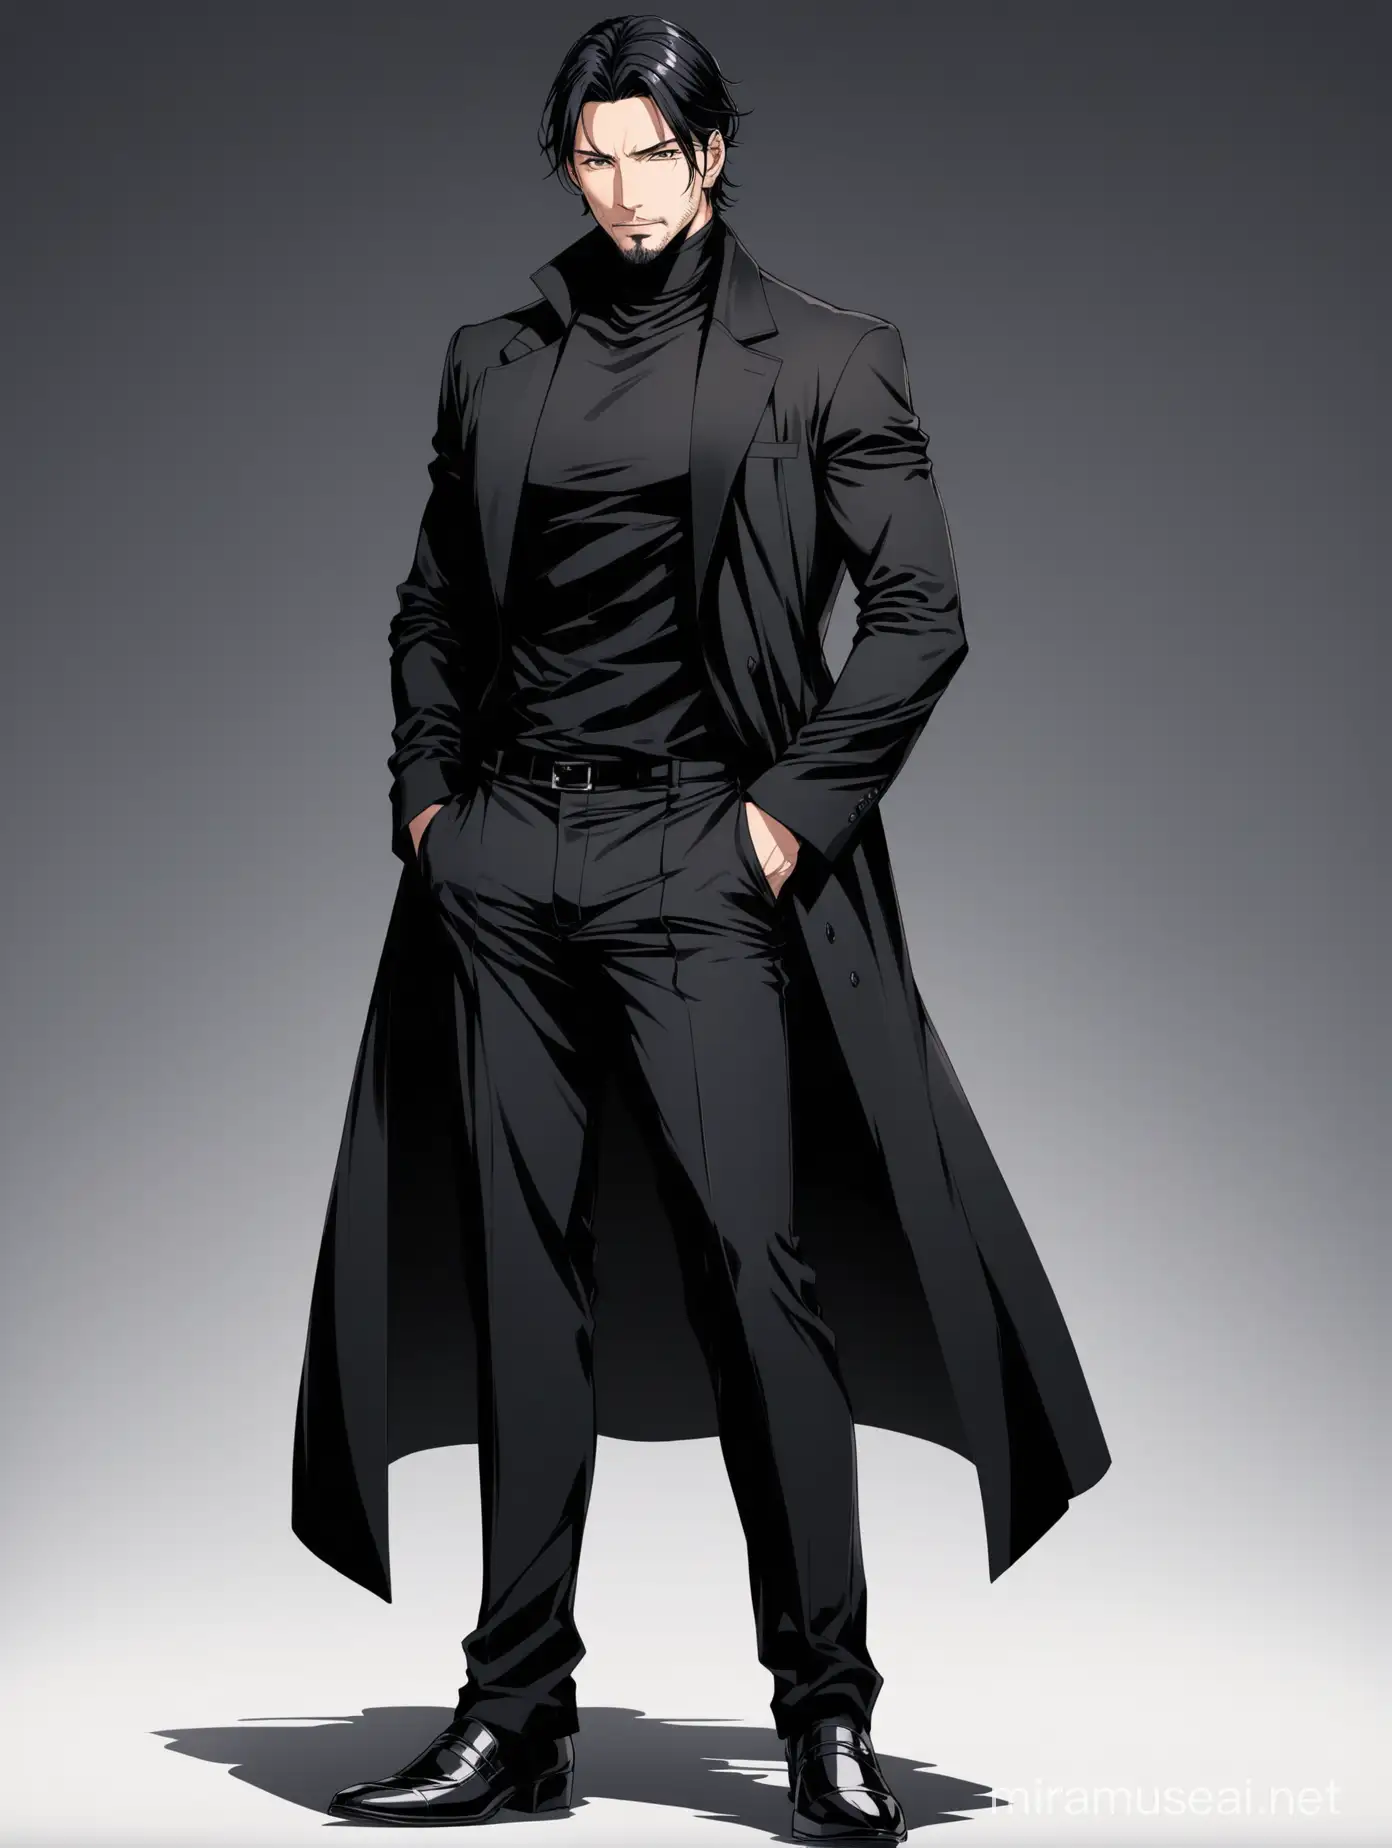 Stylish Anime Man in His Forties Wearing All Black Attire